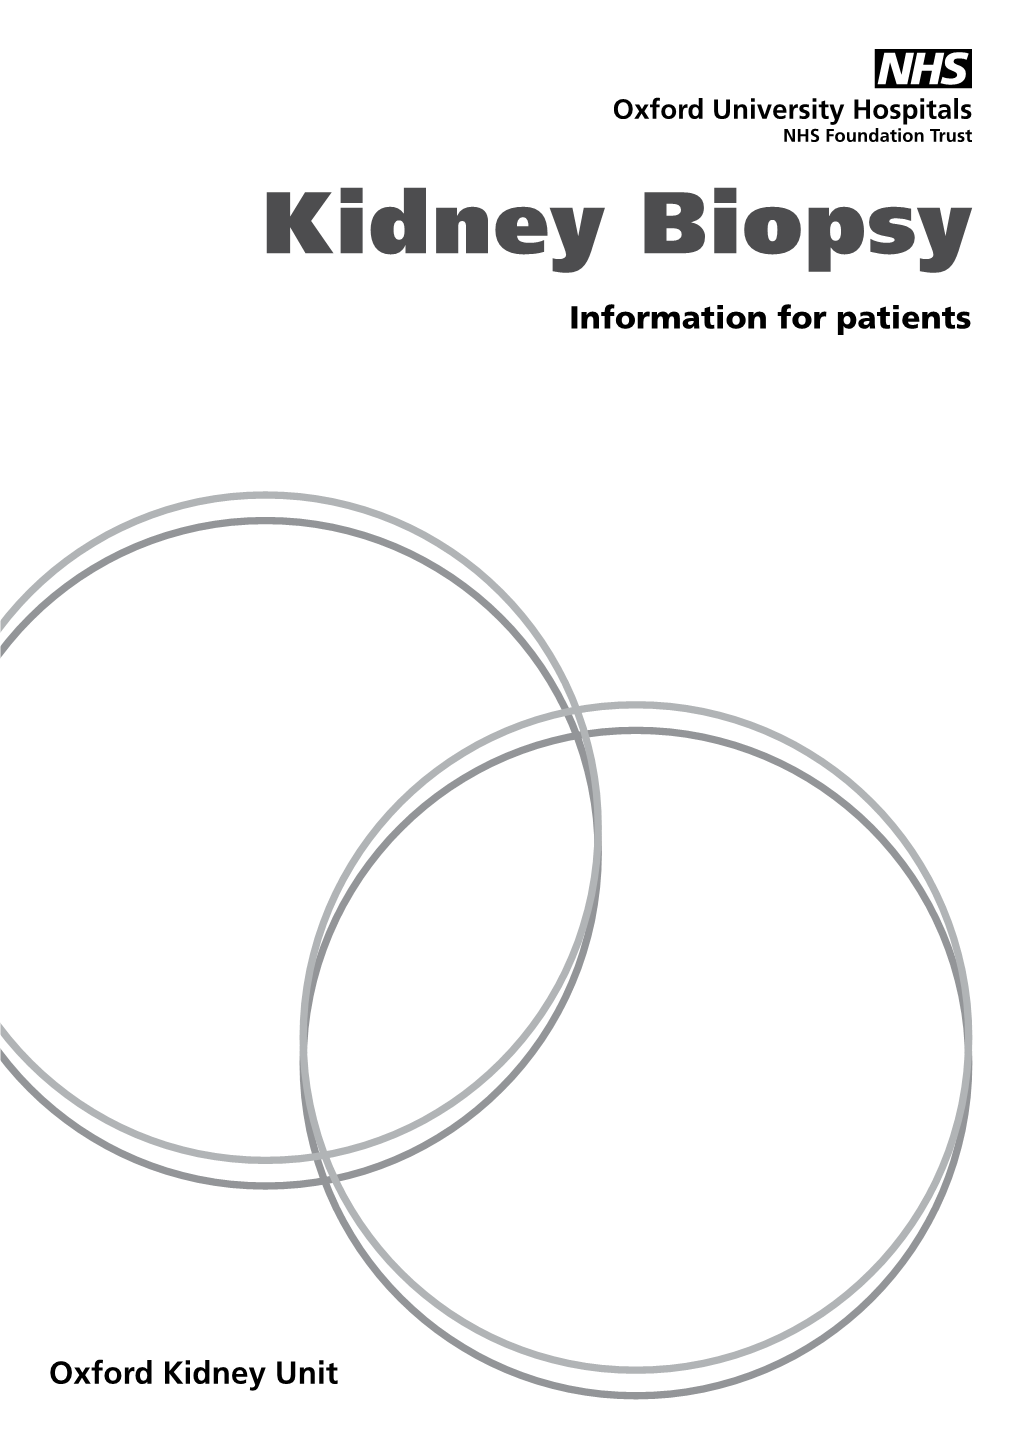 Kidney Biopsy Information for Patients